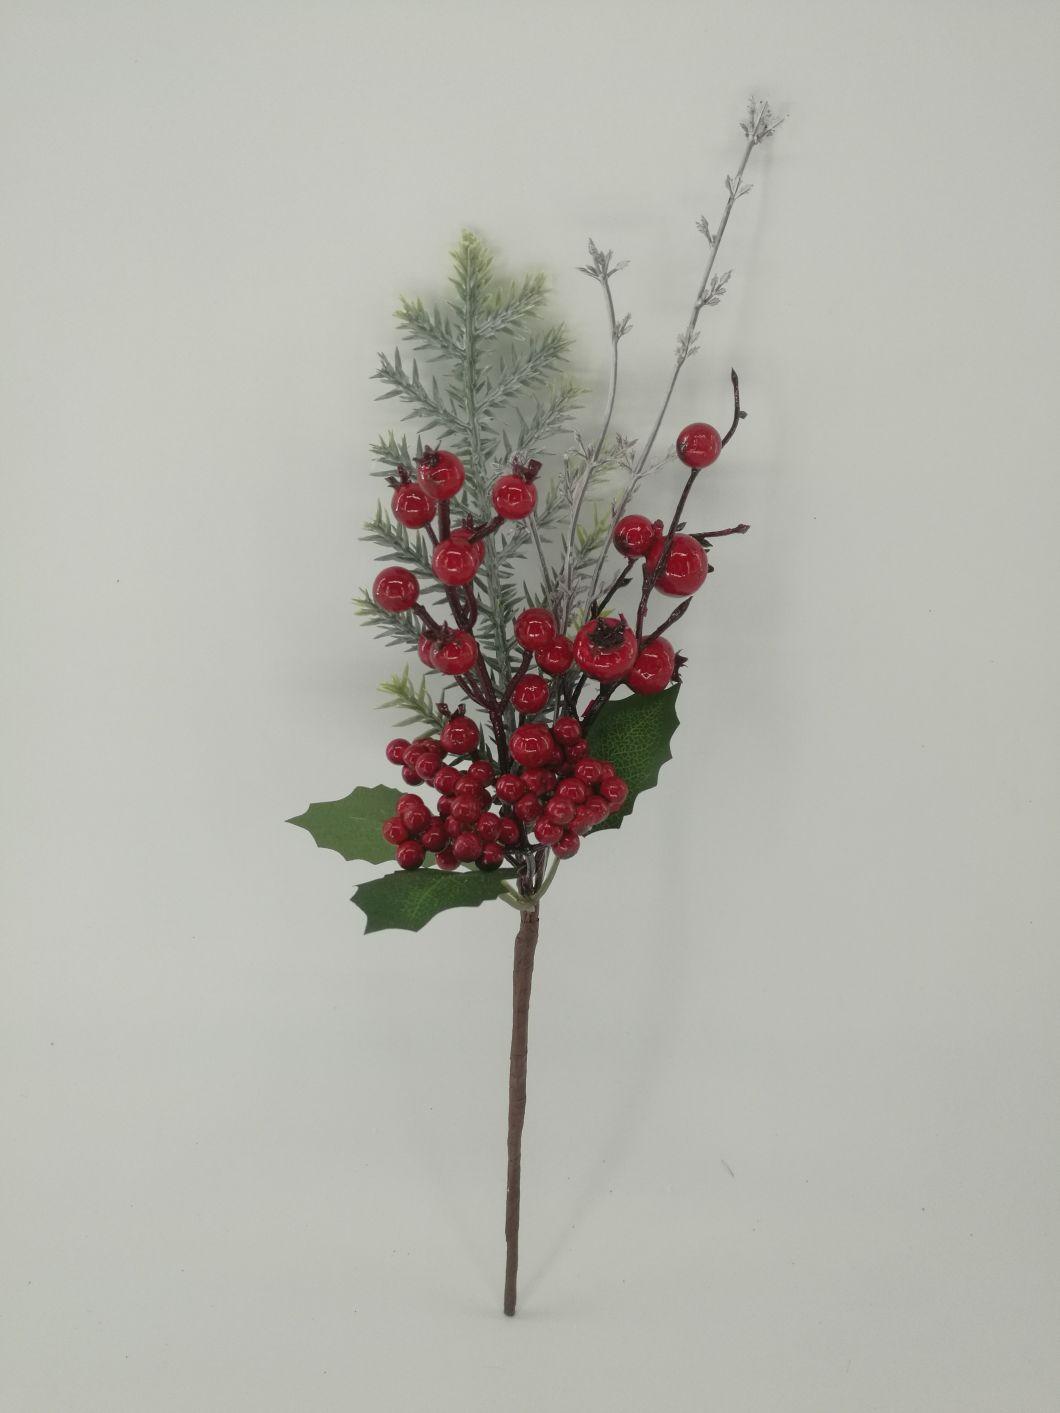 Decorative Christmas Artificial Red Berry Pick